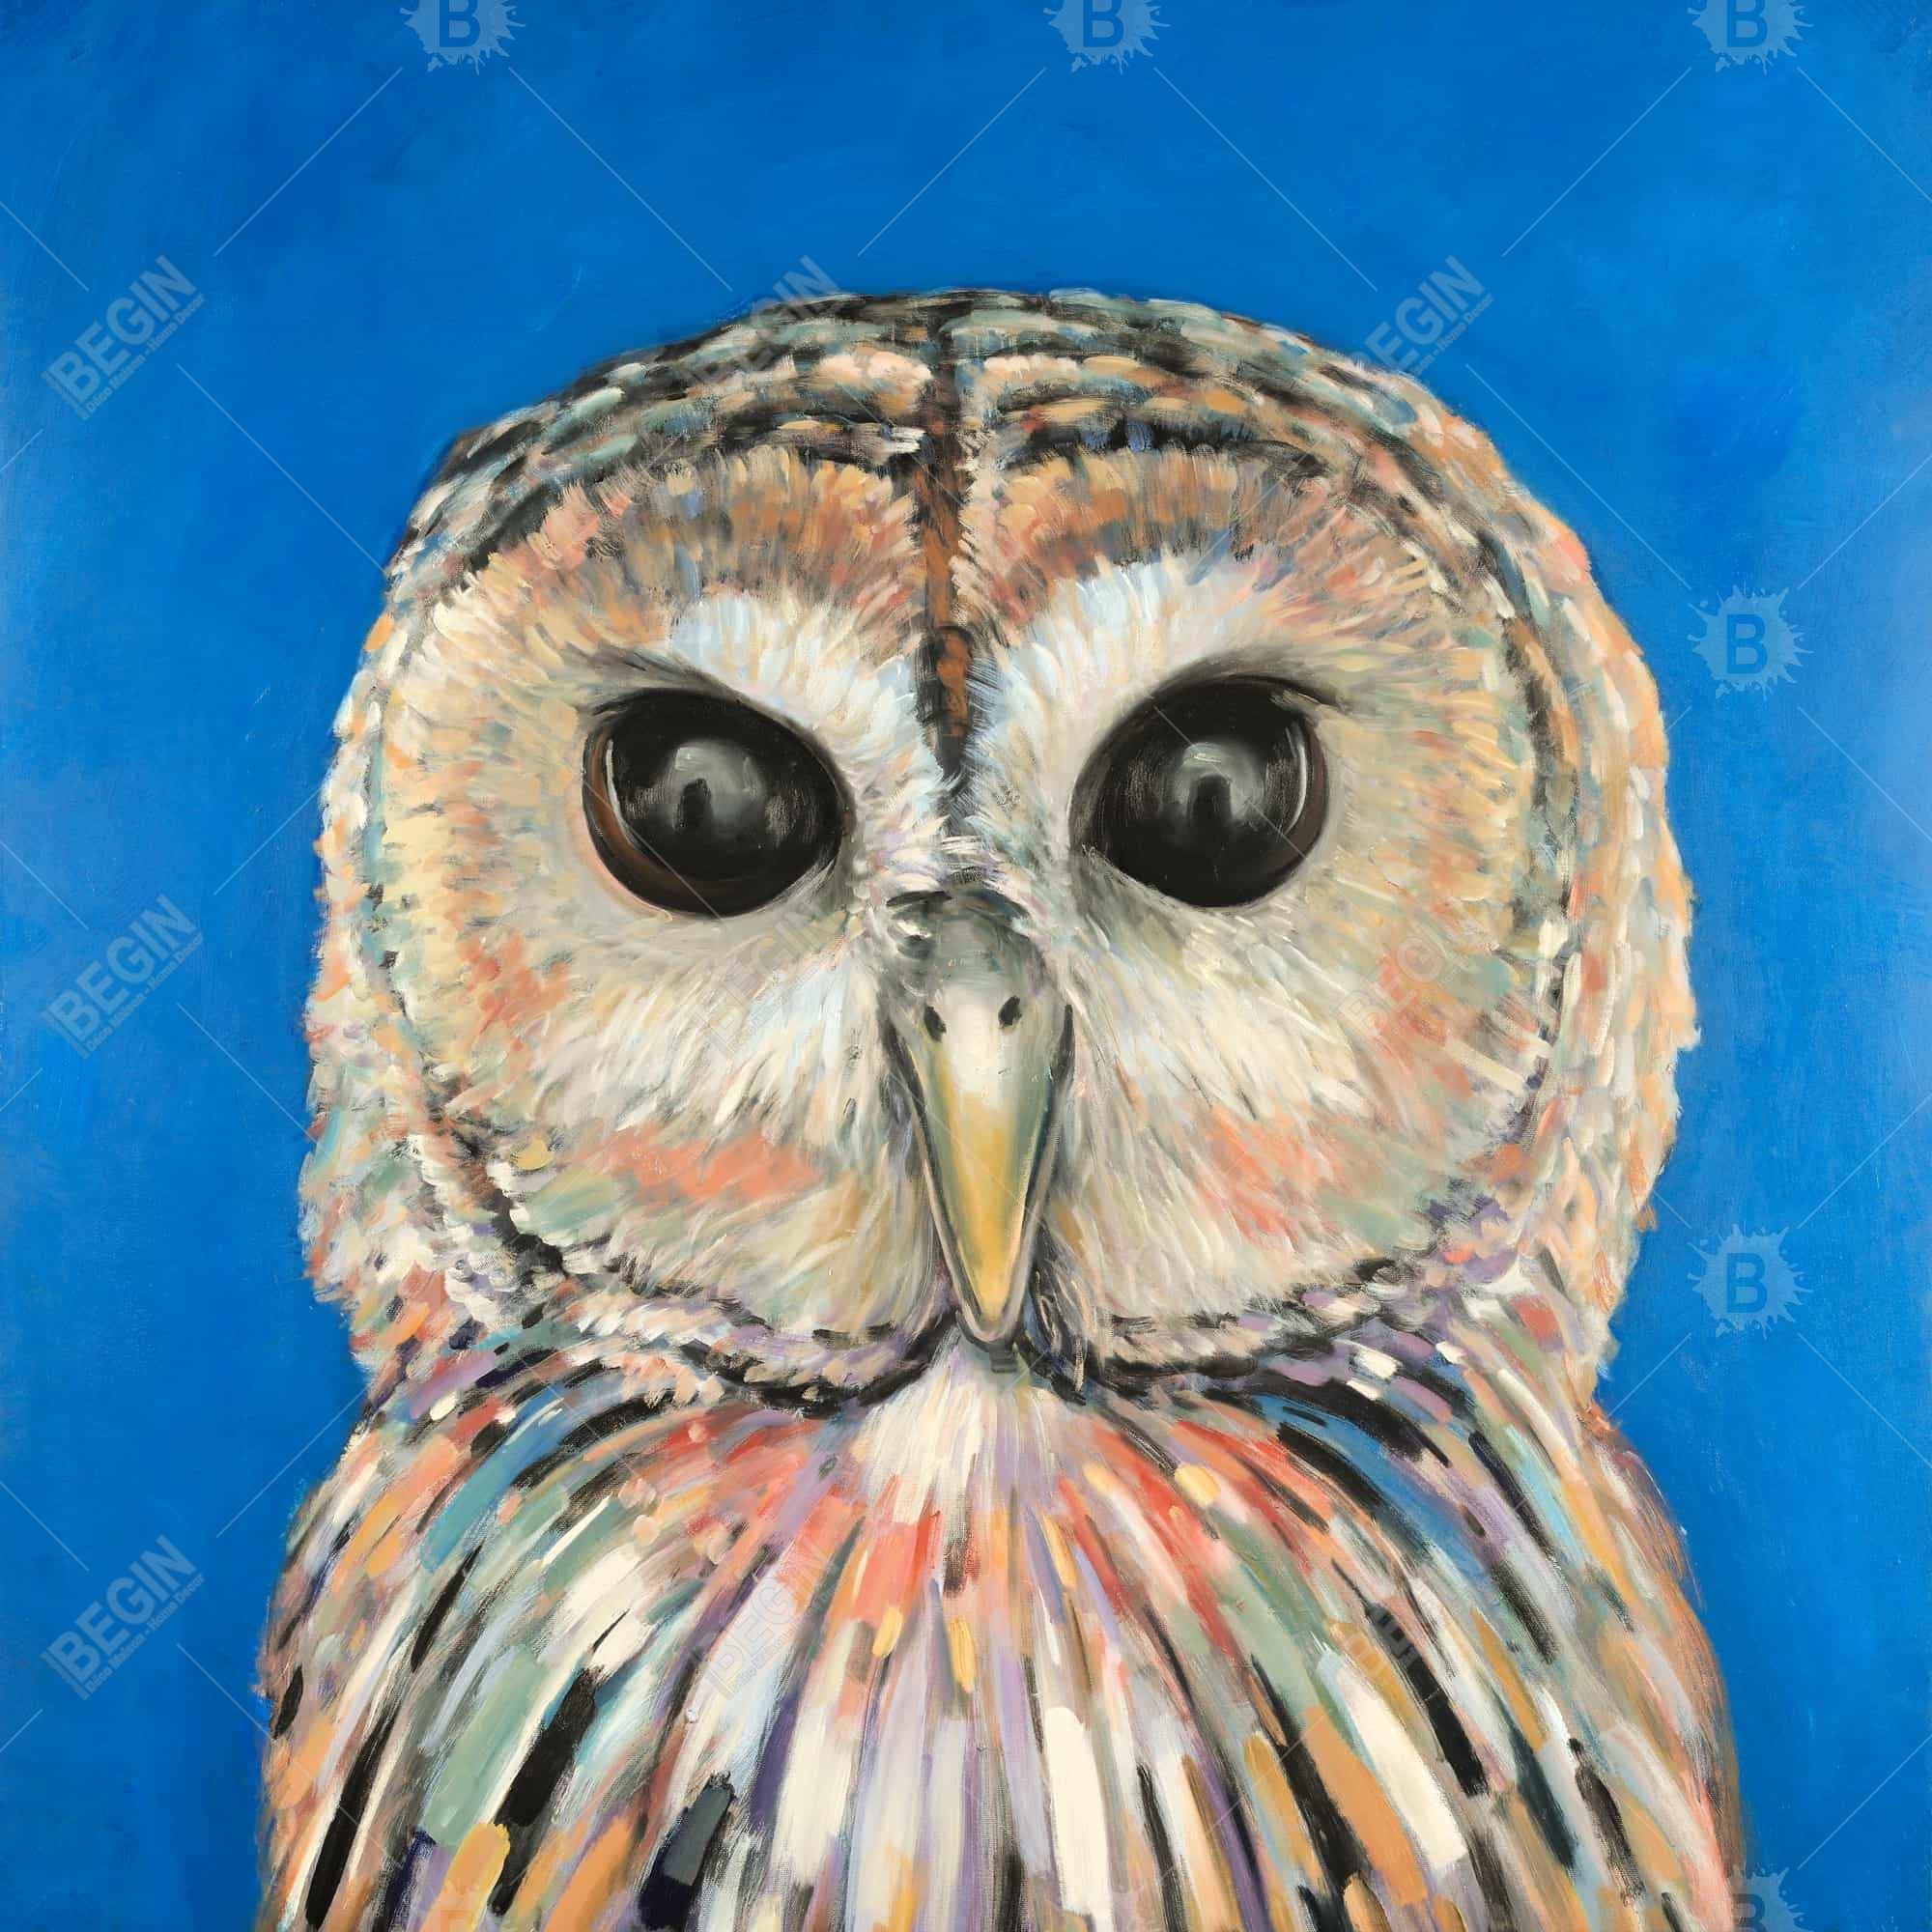 Colorful spotted owl